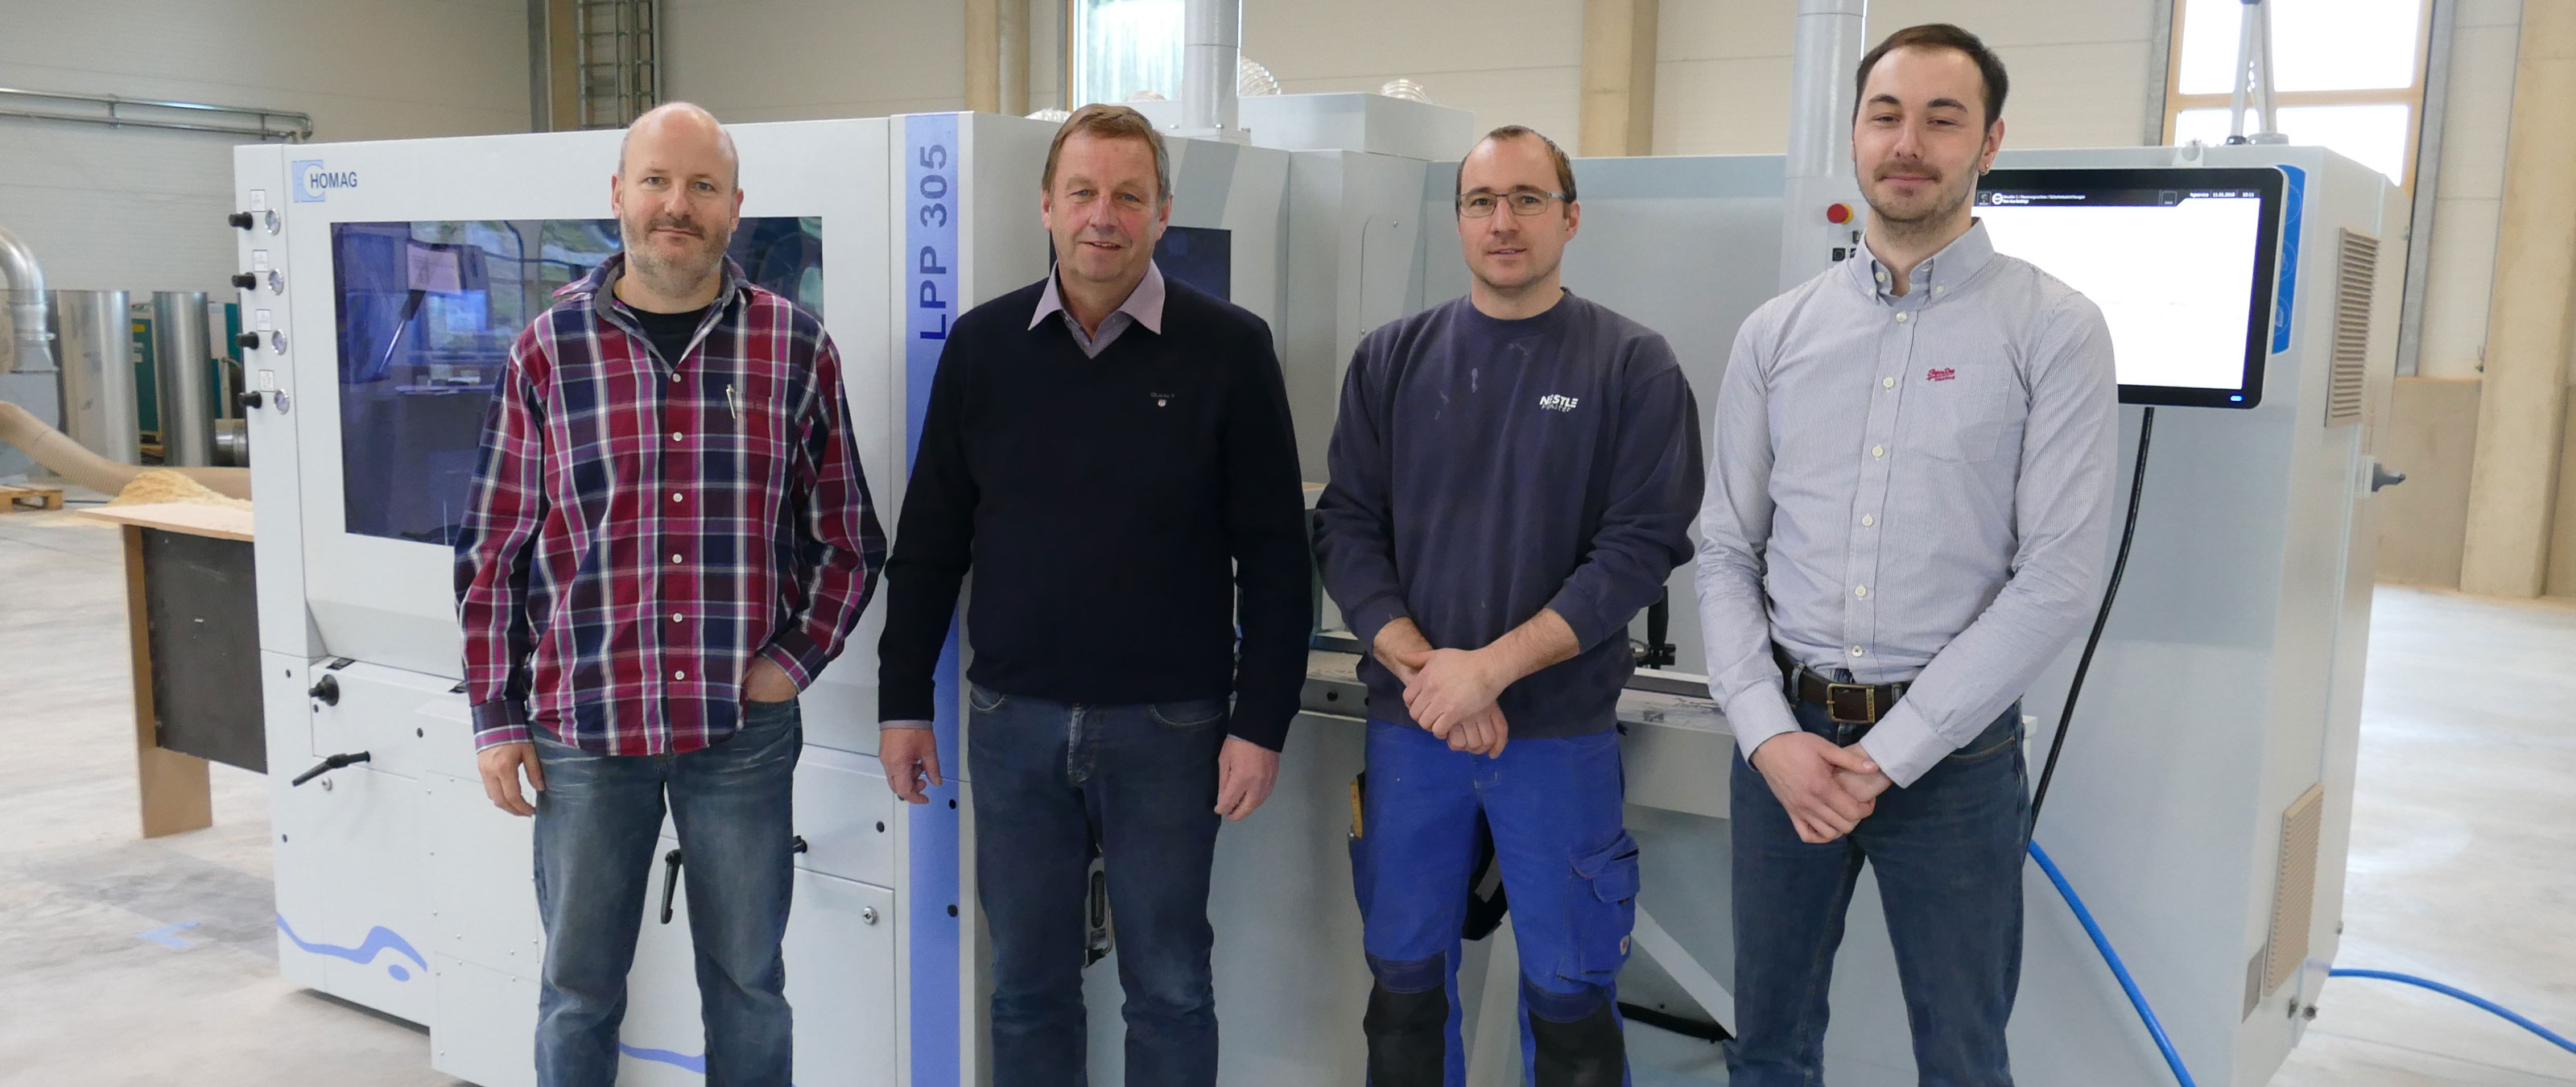 From left to right: Volker Pfefferle (Head of Work Preparation for wood and wood/aluminum), Managing Director Jürgen Nestle, Carsten Rosner (Head of Production for the wood department), Johannes Lang (Product Manager for planing machines)